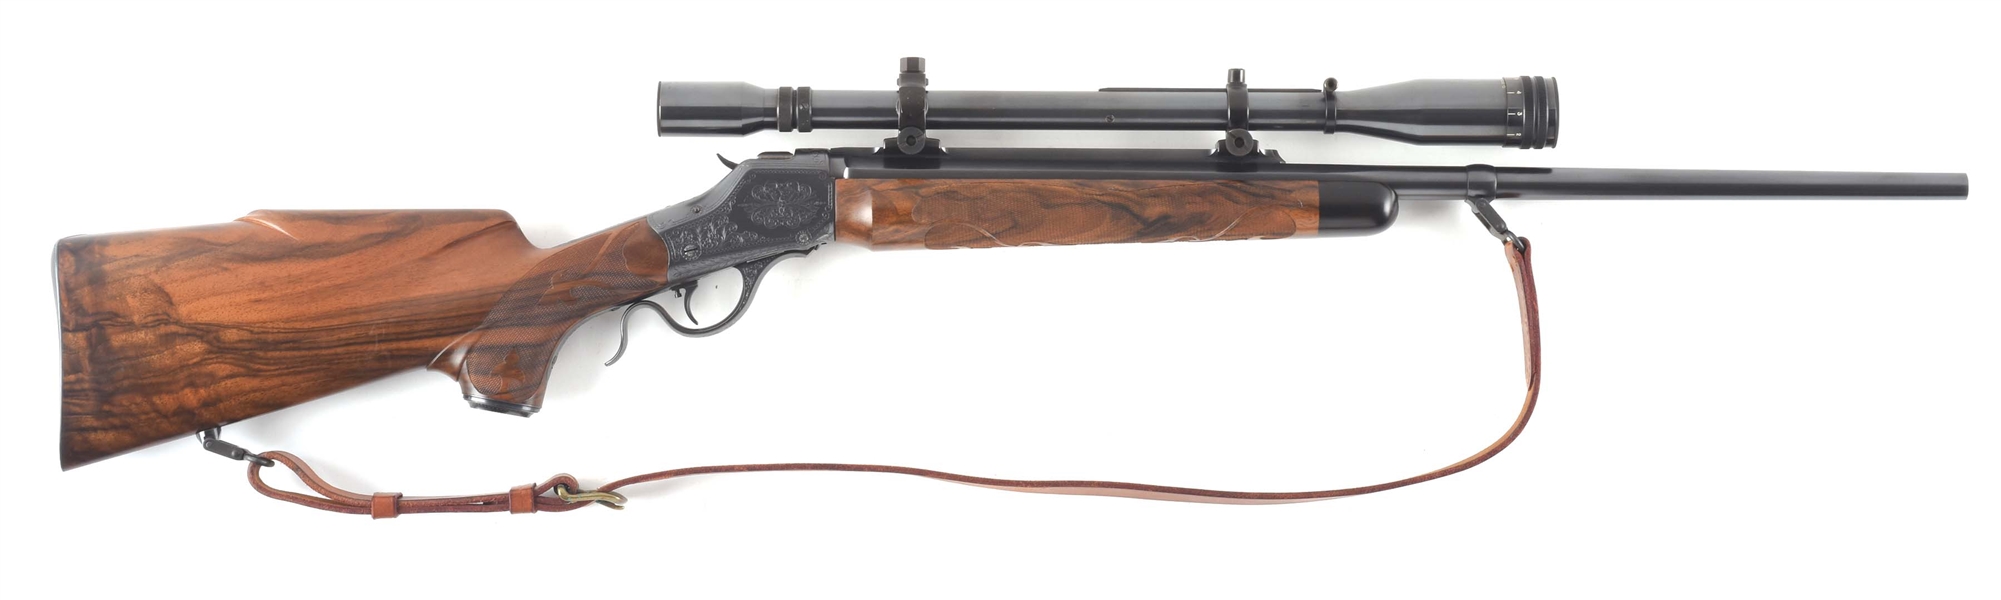 (C) VERY FINE CUSTOM THICK SIDE HIGH WALL WINCHESTER VARMINT RIFLE BY FASHINGBAUER AND ENGRAVED BY HOWARD GRANT.